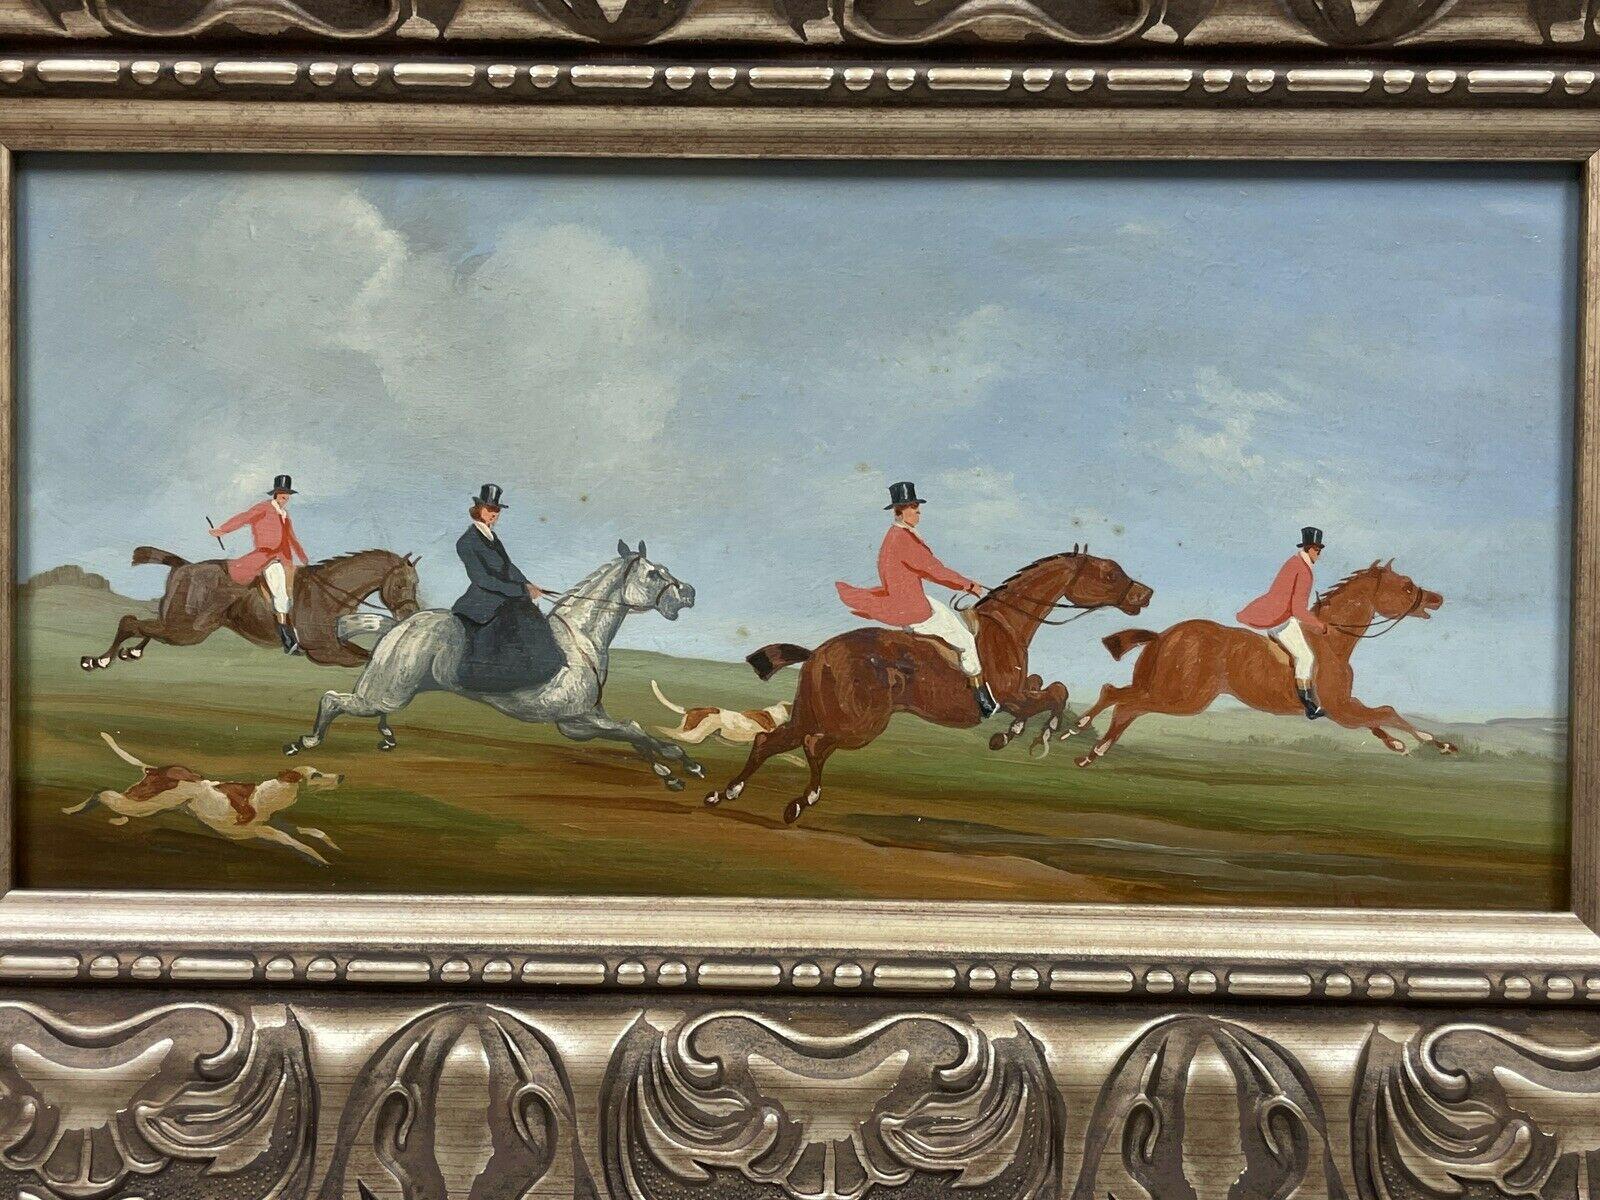 Artist/ School/ Date:
William Rowland, British 20th century

Title:
Set of four (4) British hunting scenes. Ideal group of paintings to display in a country house setting or sporting art themed interior.

Medium & Size:
4 x oil paintings on